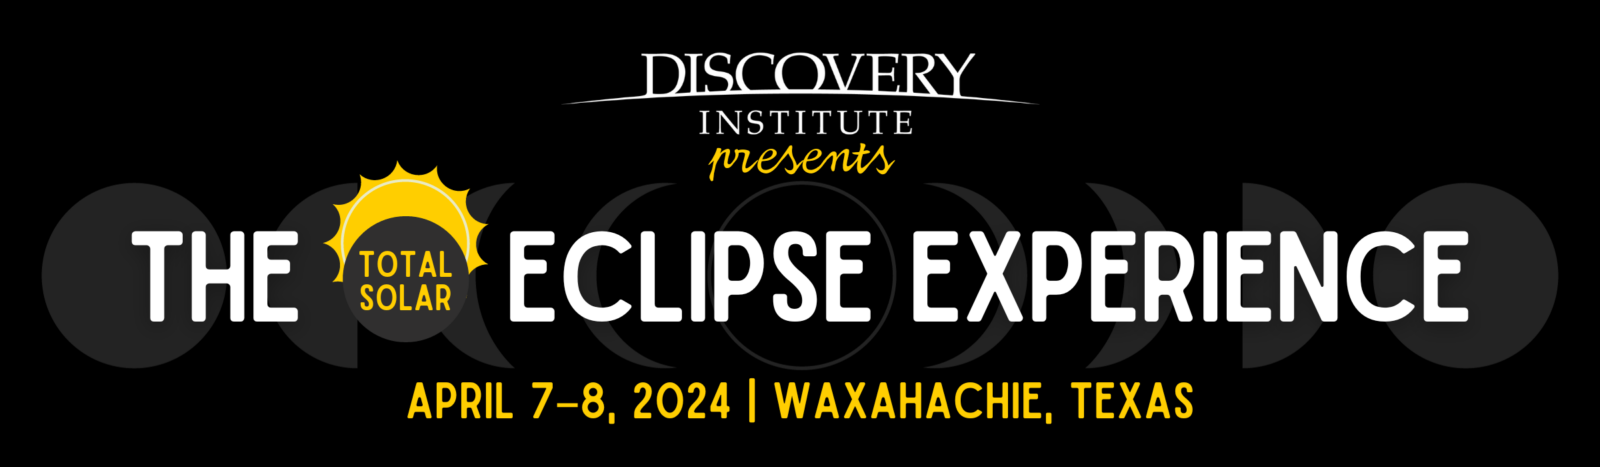 eclipse discovery tour stargazing